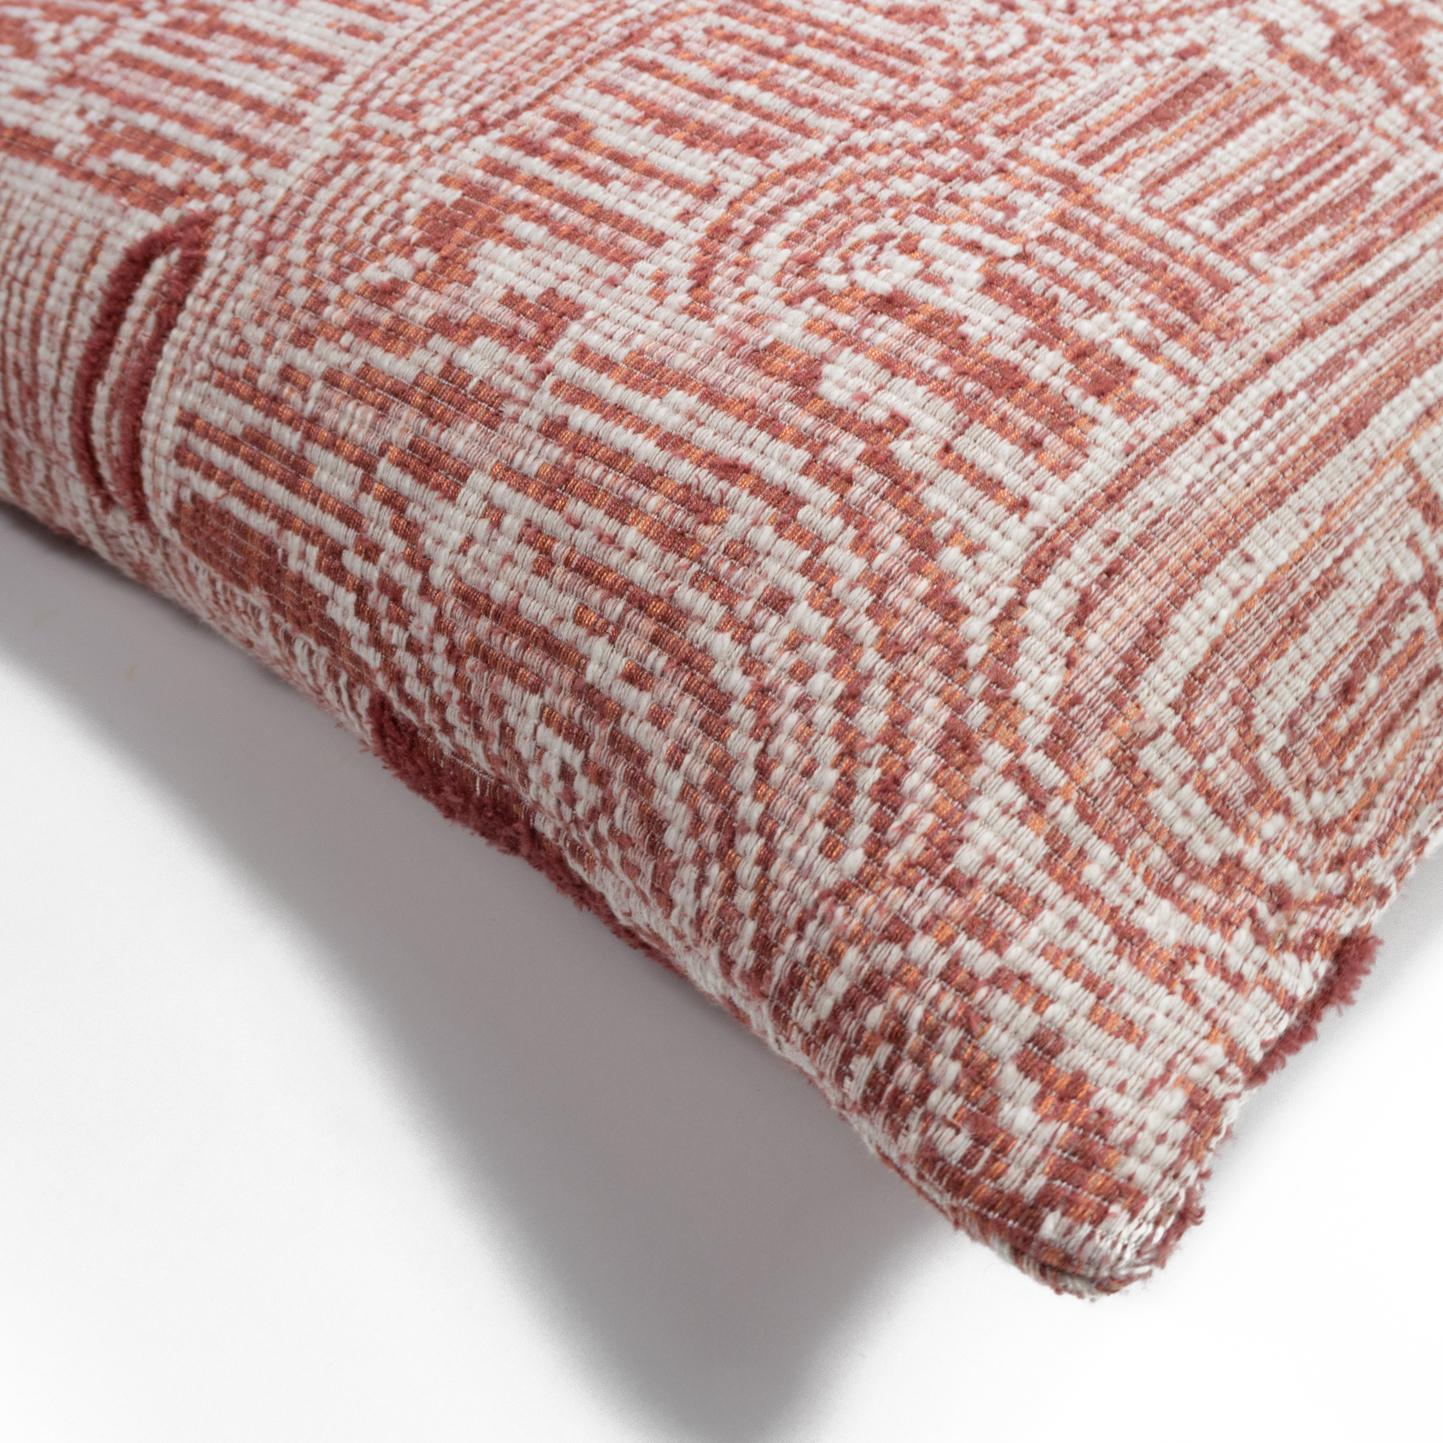 Referencing the canals which criss-cross the city after which the fabric is named, our Amsterdam cushion can bring a geometric yet playful element to your spaces. With a myriad of interconnecting lines all texturally distinct from one another, one